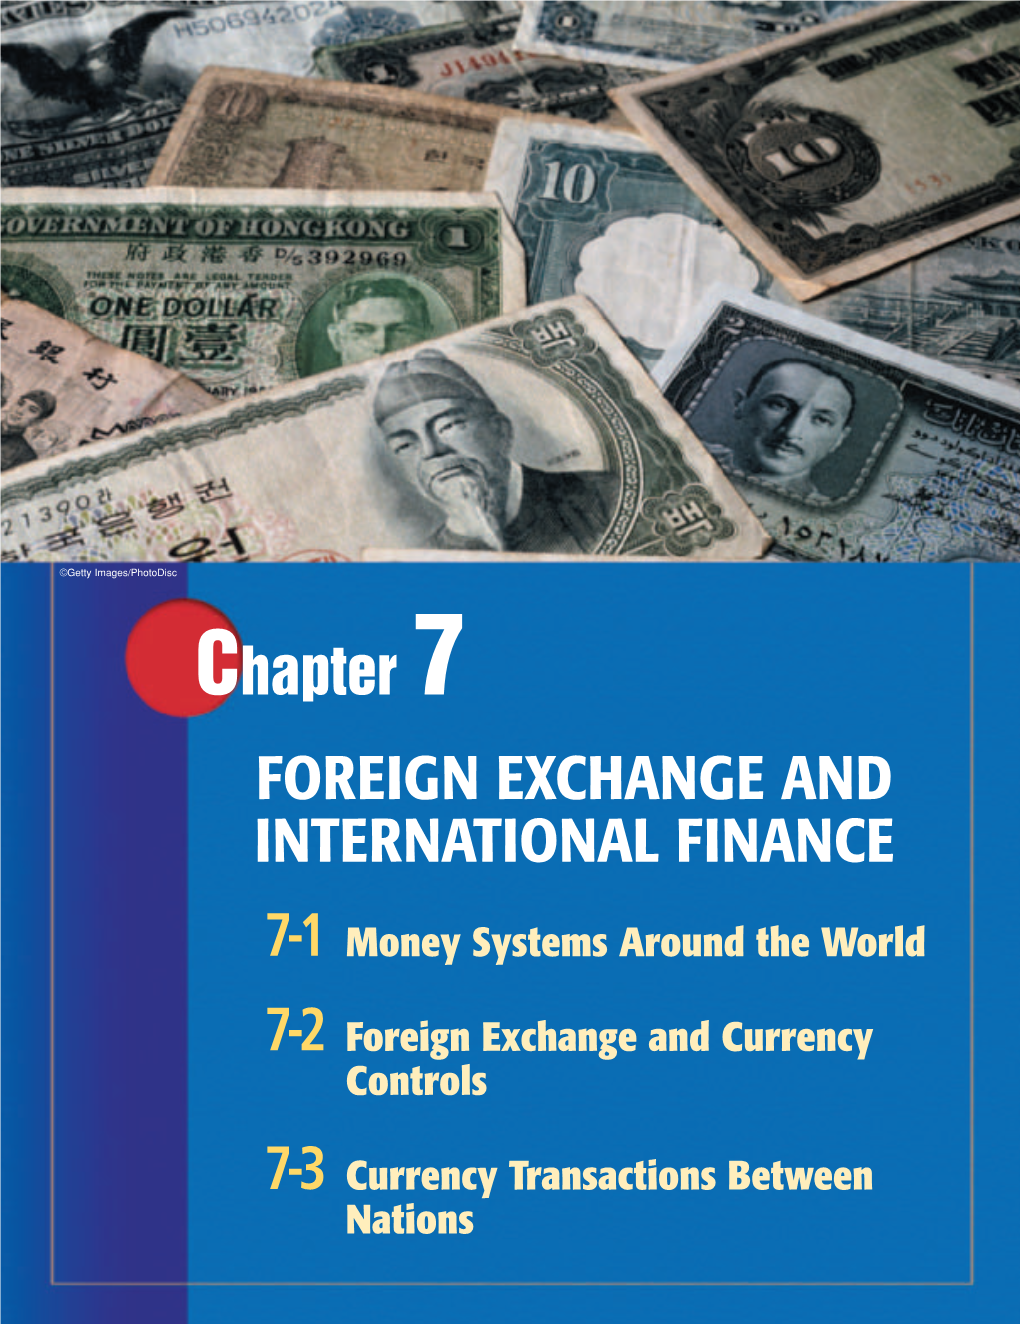 Chapter 7: Foreign Exchange and International Finance